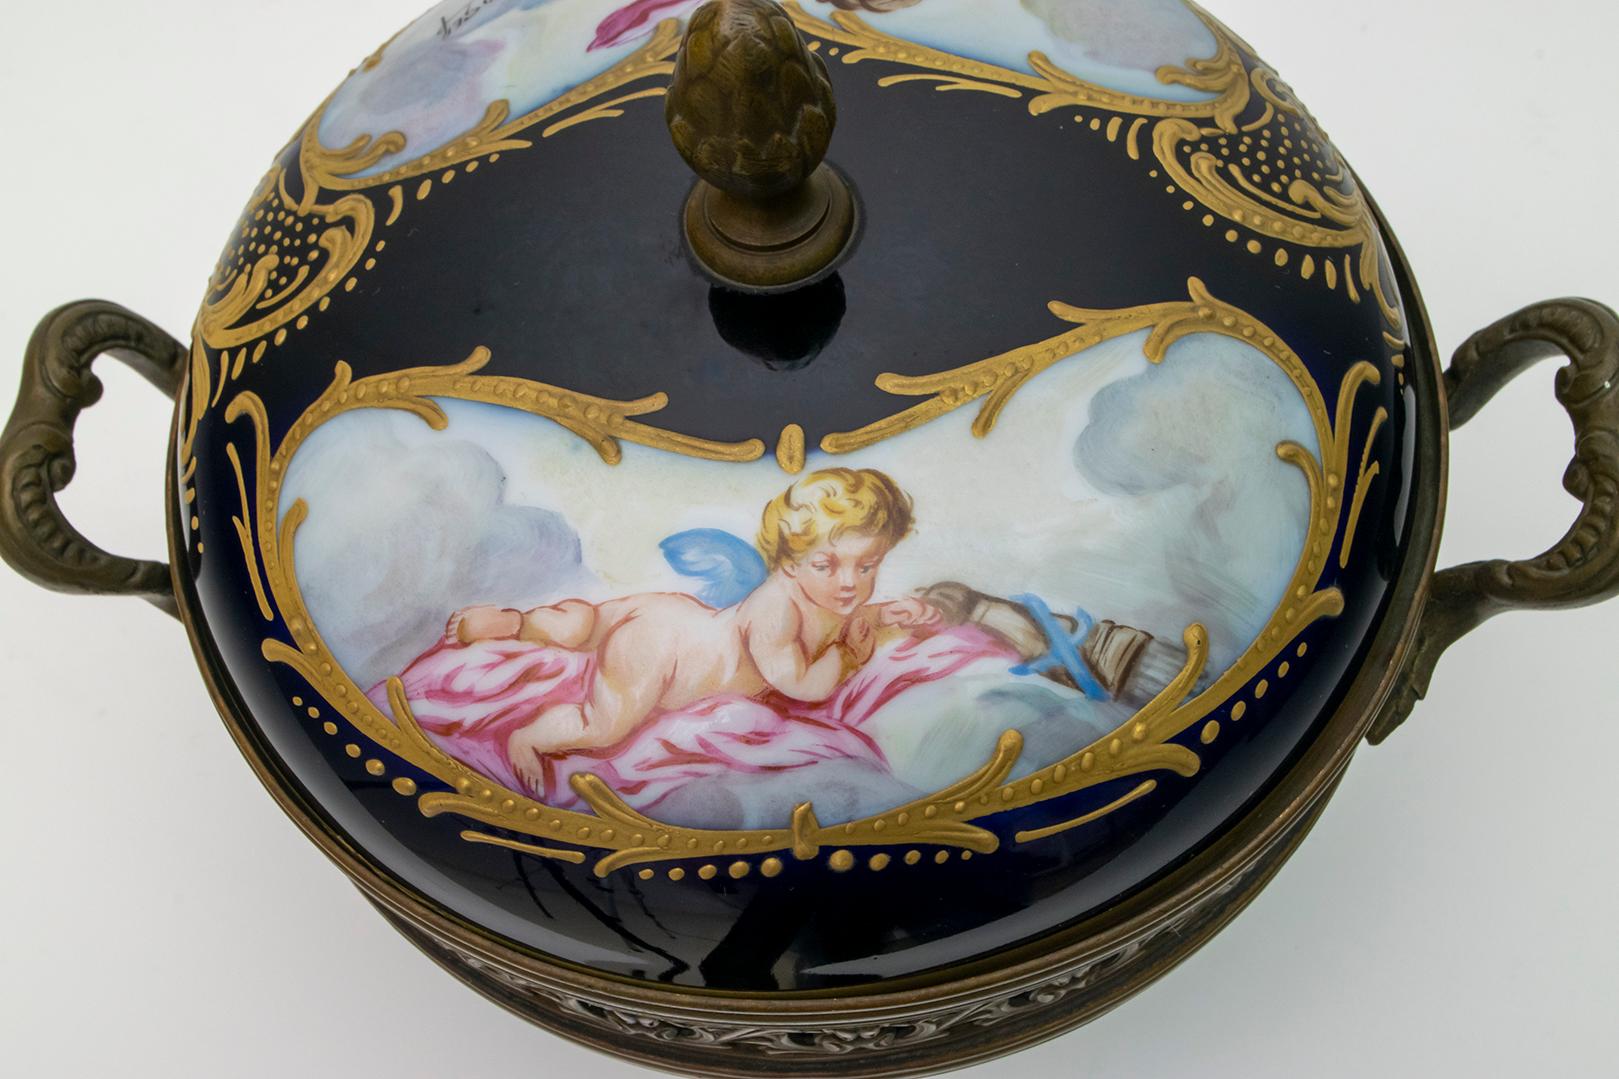 Signed E. Froger 19th Century French Porcelain Potpourri by Sevres, 1880 For Sale 2